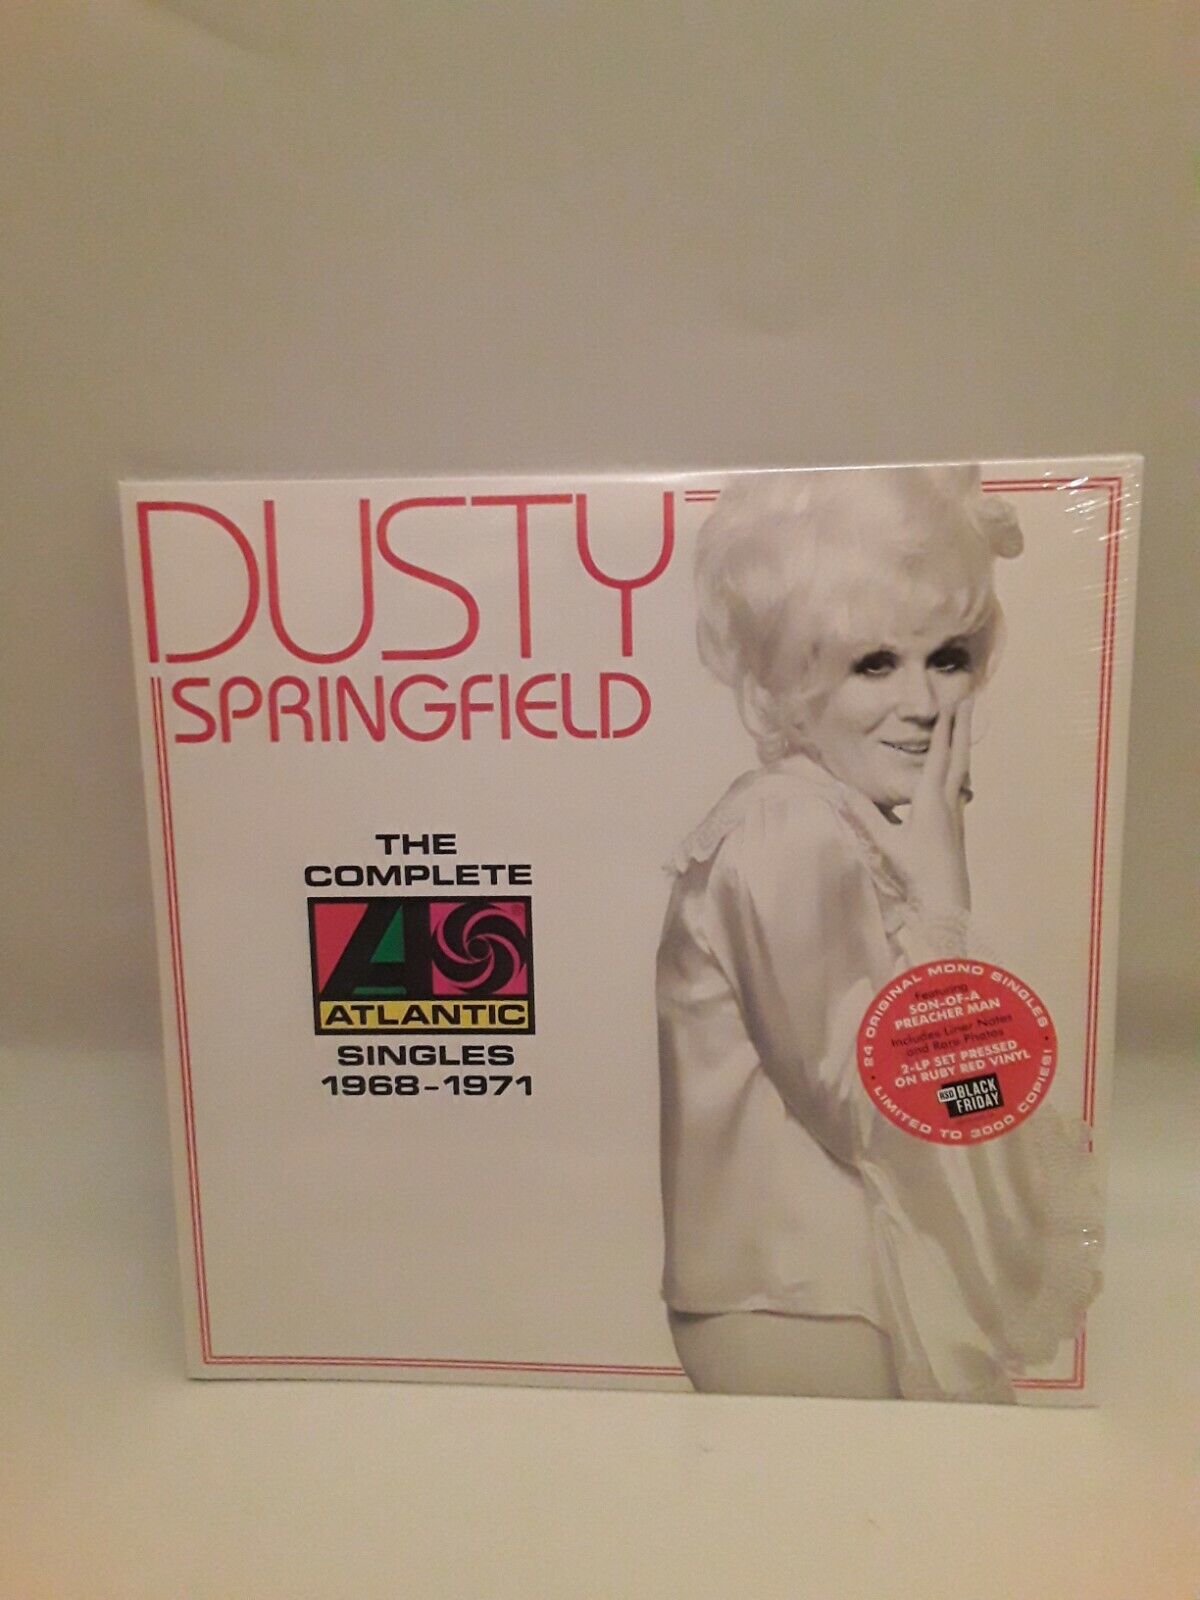 Dusty Springfield - the Complete Atlantic Singles 1968-1971 Red Ruby Vinyl RSD 2